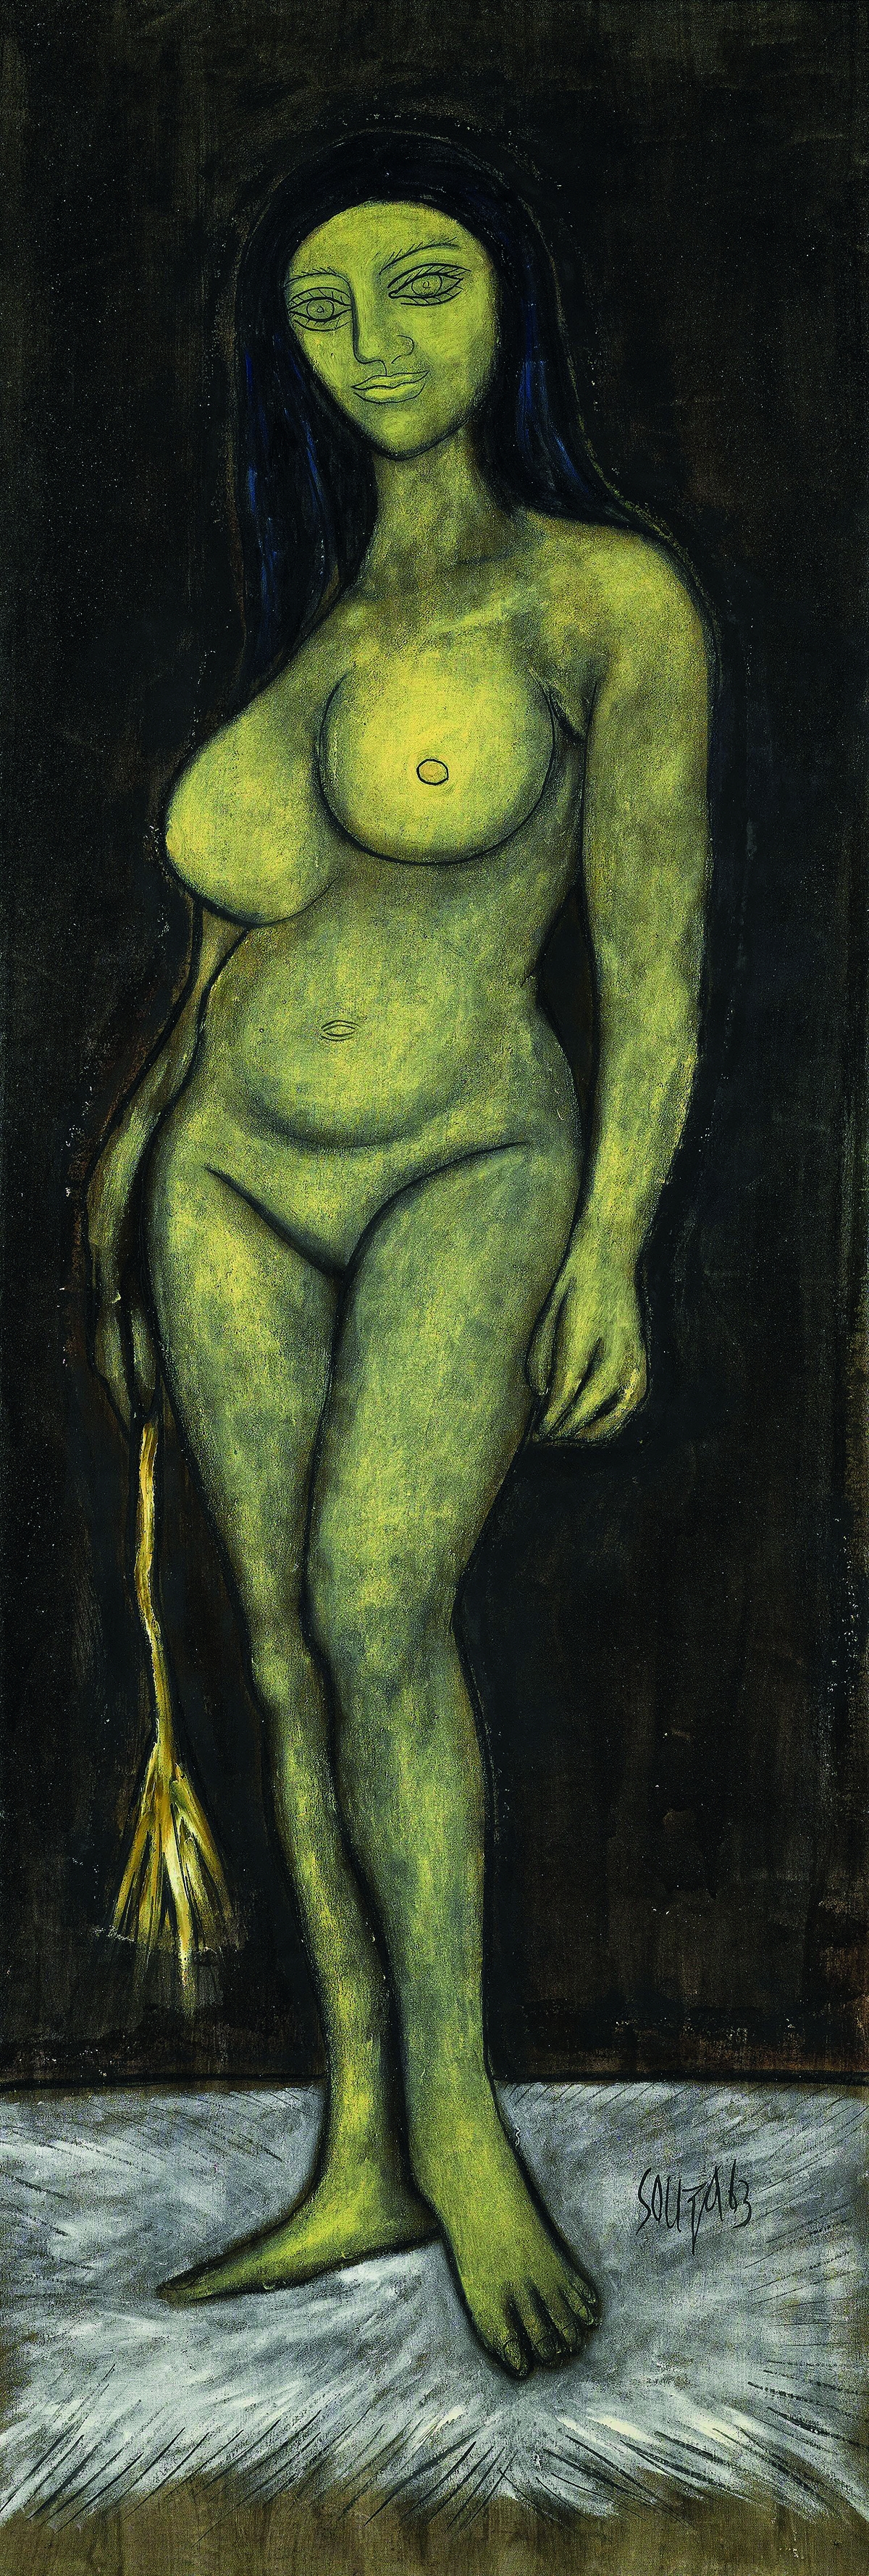 F. N. Souza. Girl with the Silken Whip, 1963. Oil on canvas. H. 68 1/2 x W. 23 5/8 in. (174 x 60 cm). Private collection, London. Courtesy of the lender 